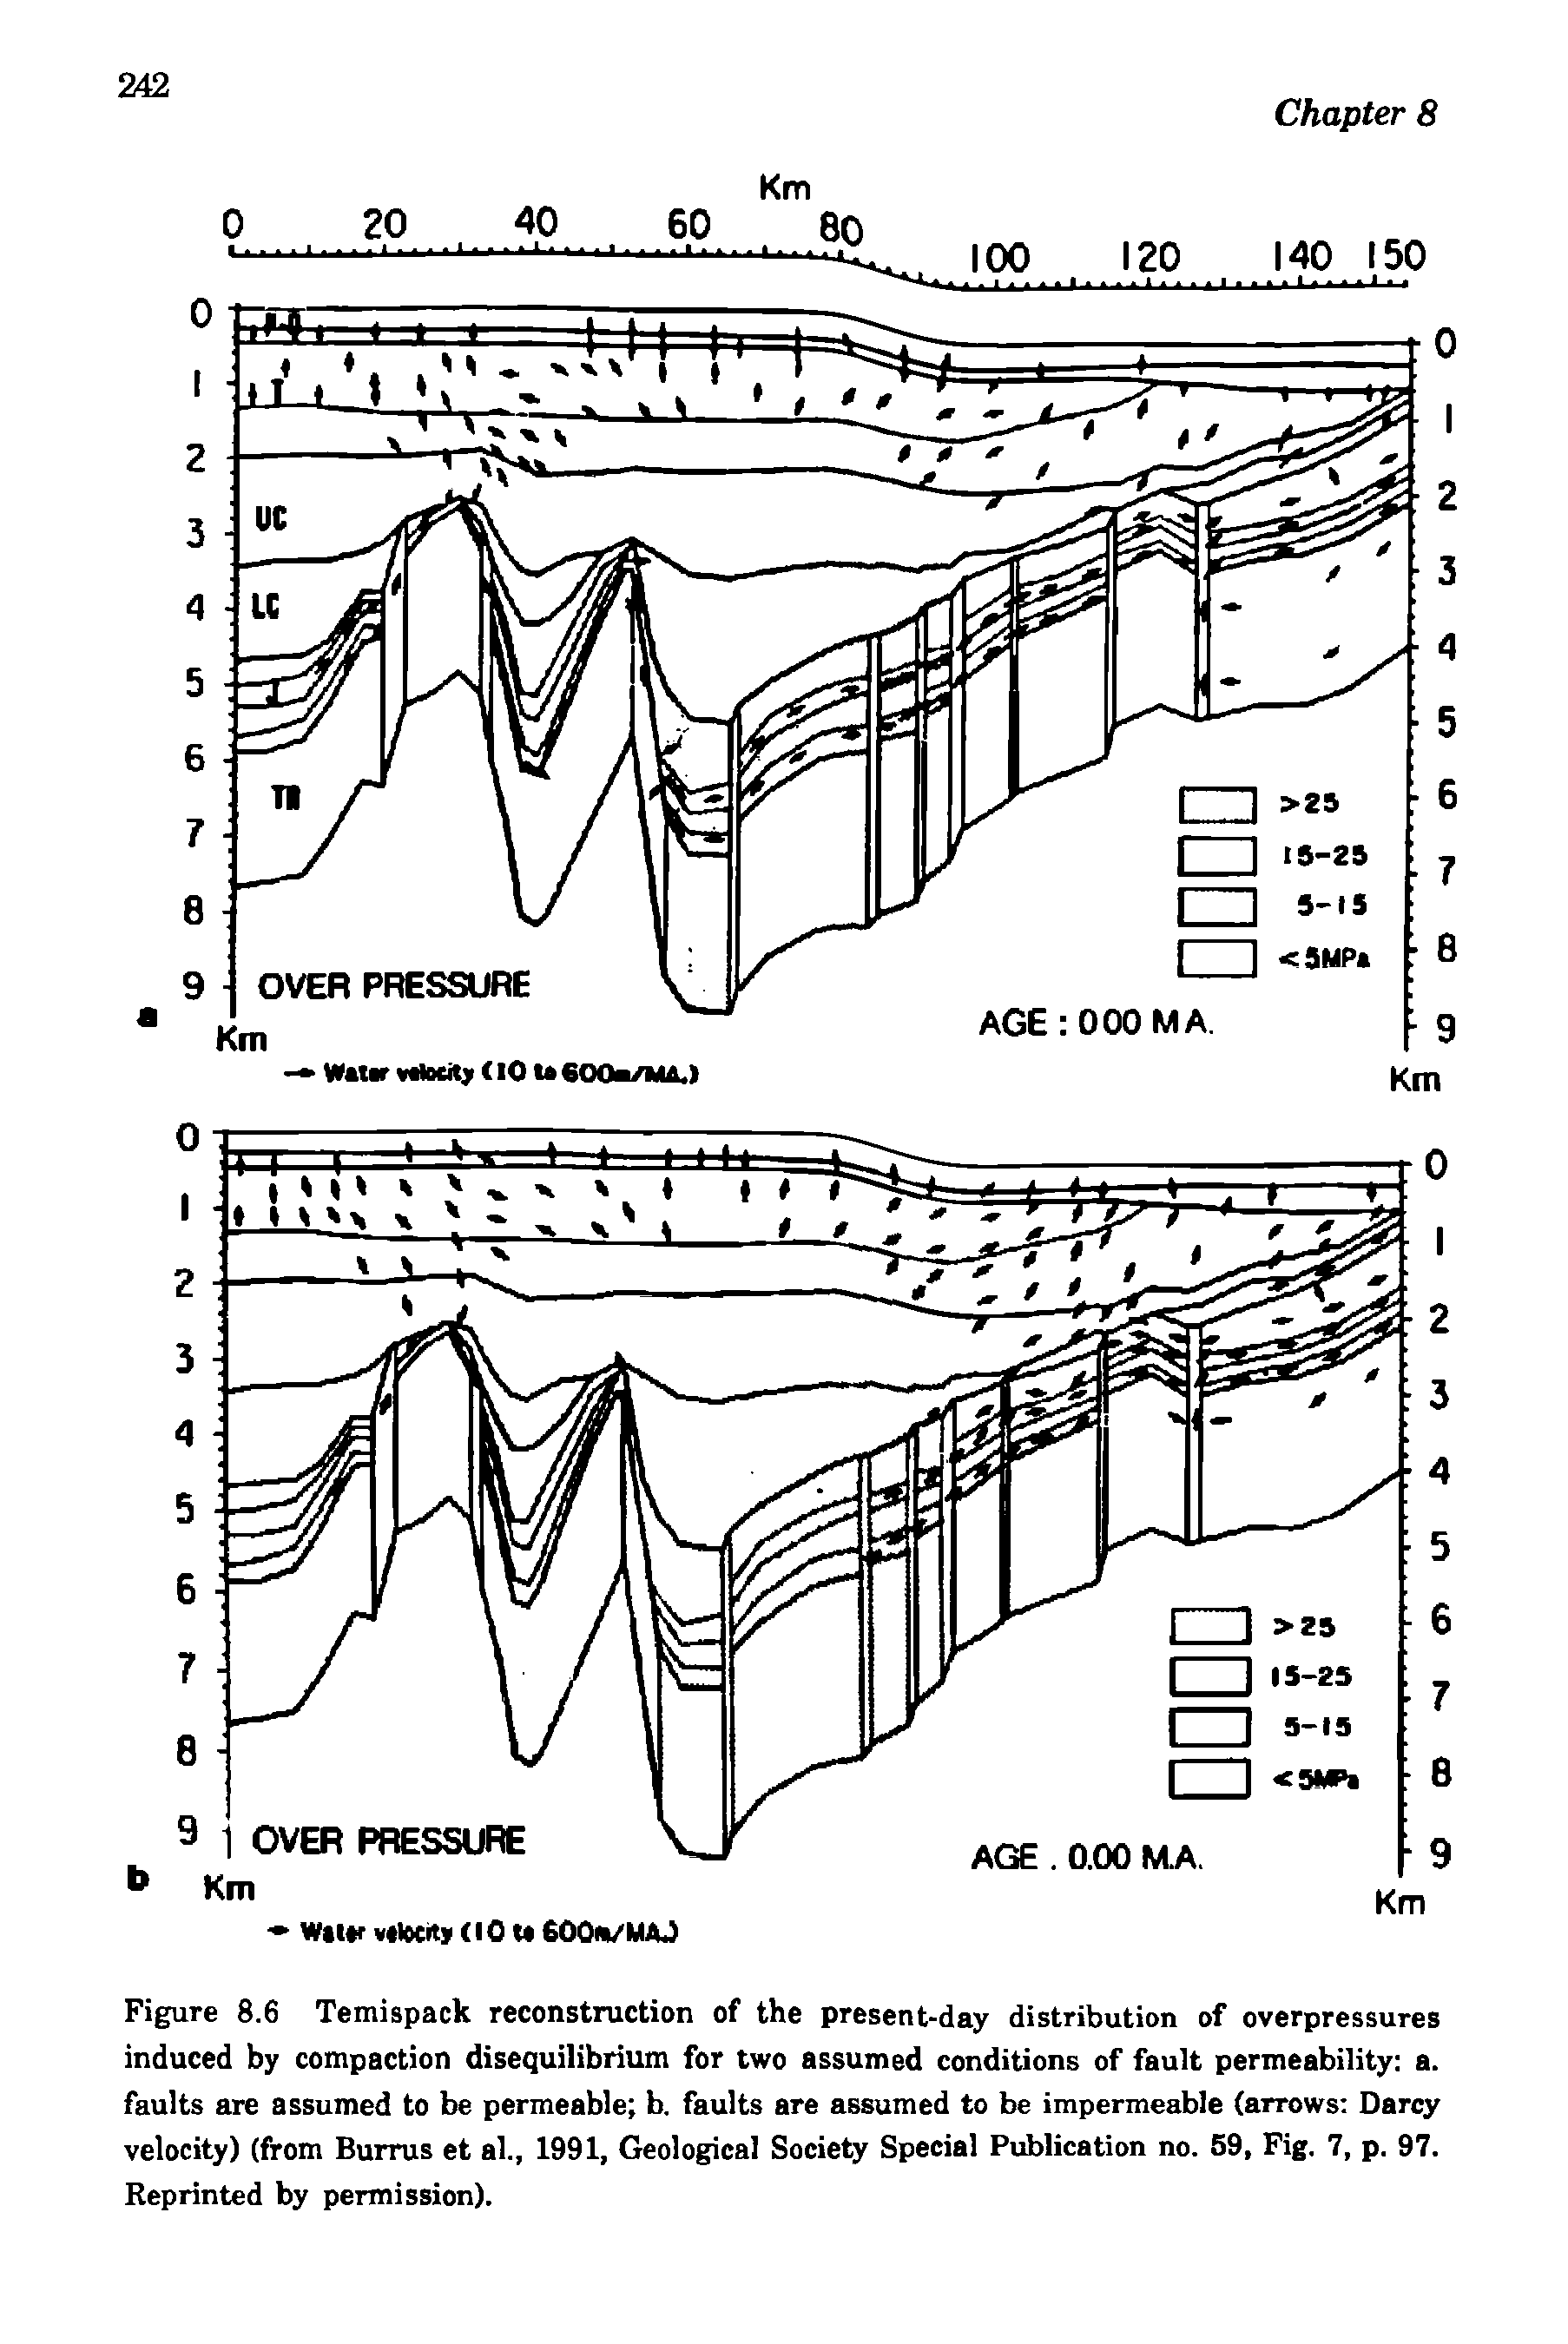 Figure 8.6 Temispack reconstruction of the present-day distribution of overpressures induced by compaction disequilibrium for two assumed conditions of fault permeability a. faults are assumed to be permeable b. faults are assumed to be impermeable (arrows Darcy velocity) (from Burrus et al., 1991, Geological Society Special Publication no. 59, Fig. 7, p. 97. Reprinted by permission).